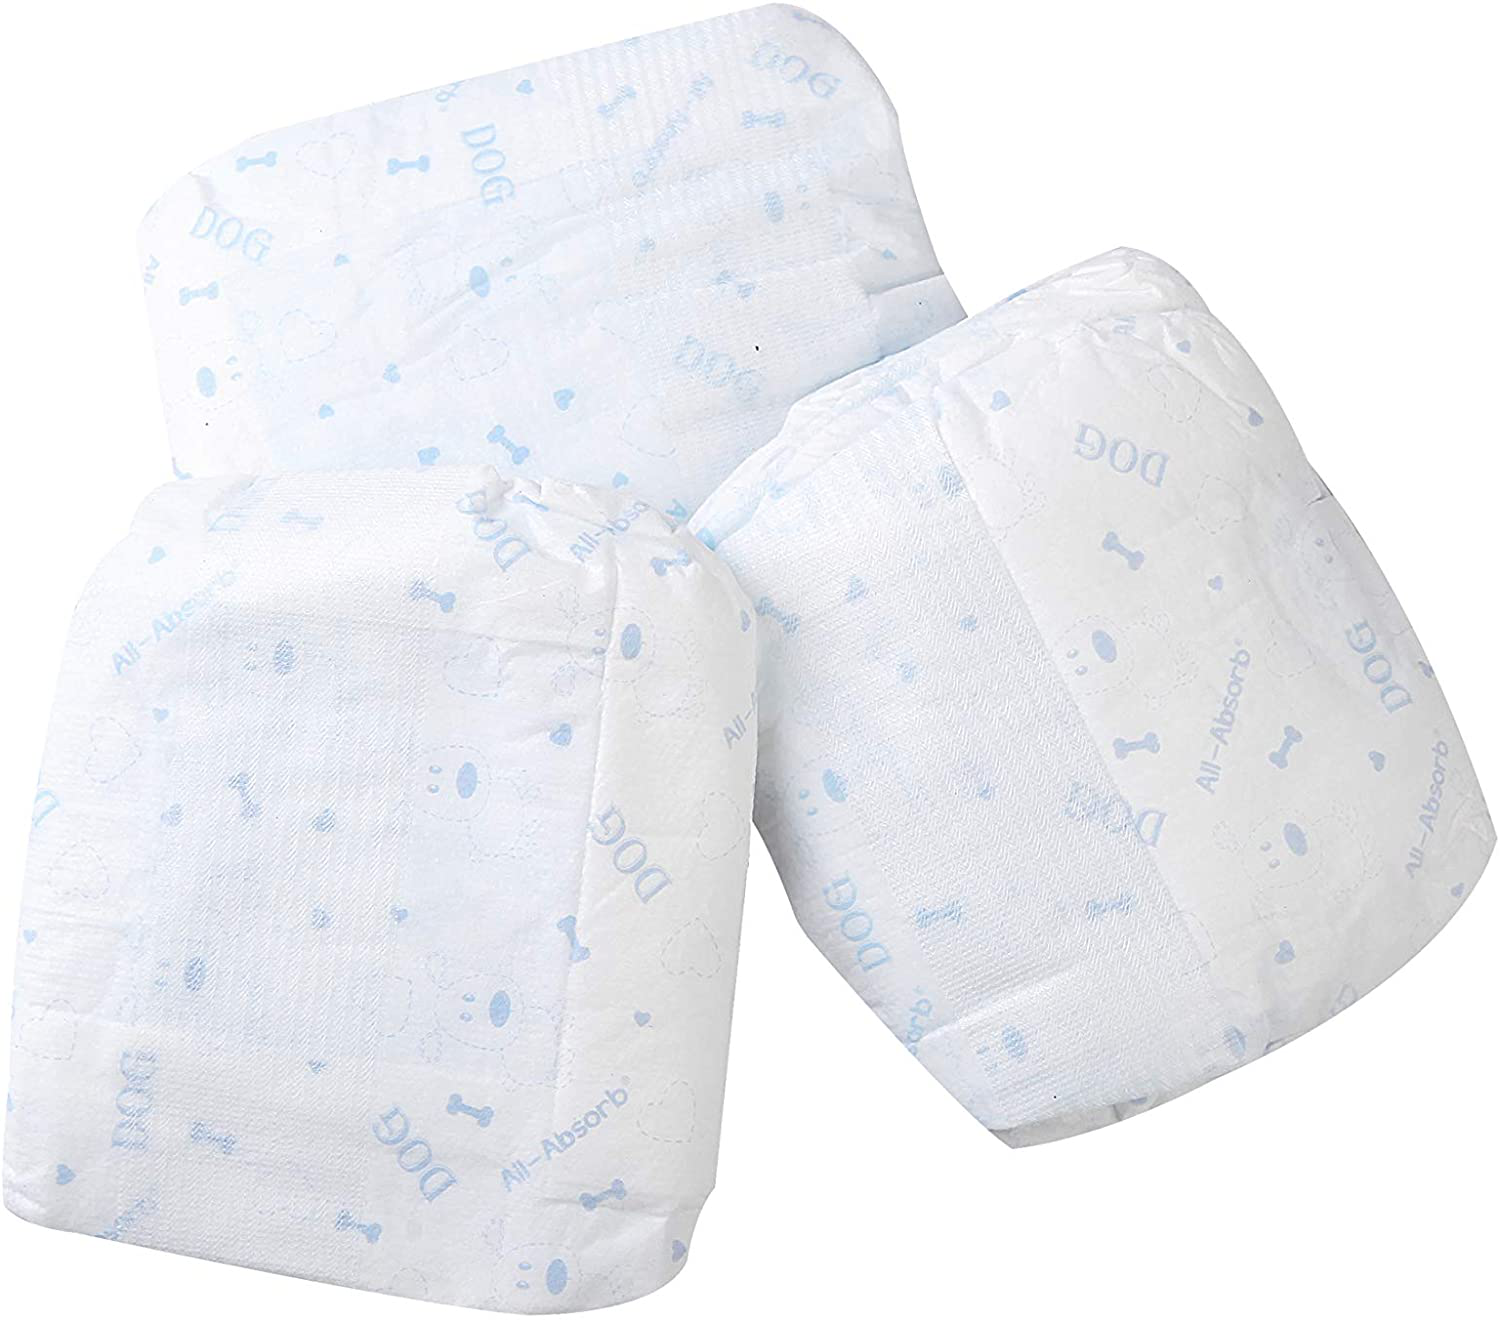 All-Absorb Disposable Female Dog Diapers, Medium Animals & Pet Supplies > Pet Supplies > Dog Supplies > Dog Diaper Pads & Liners All-Absorb   